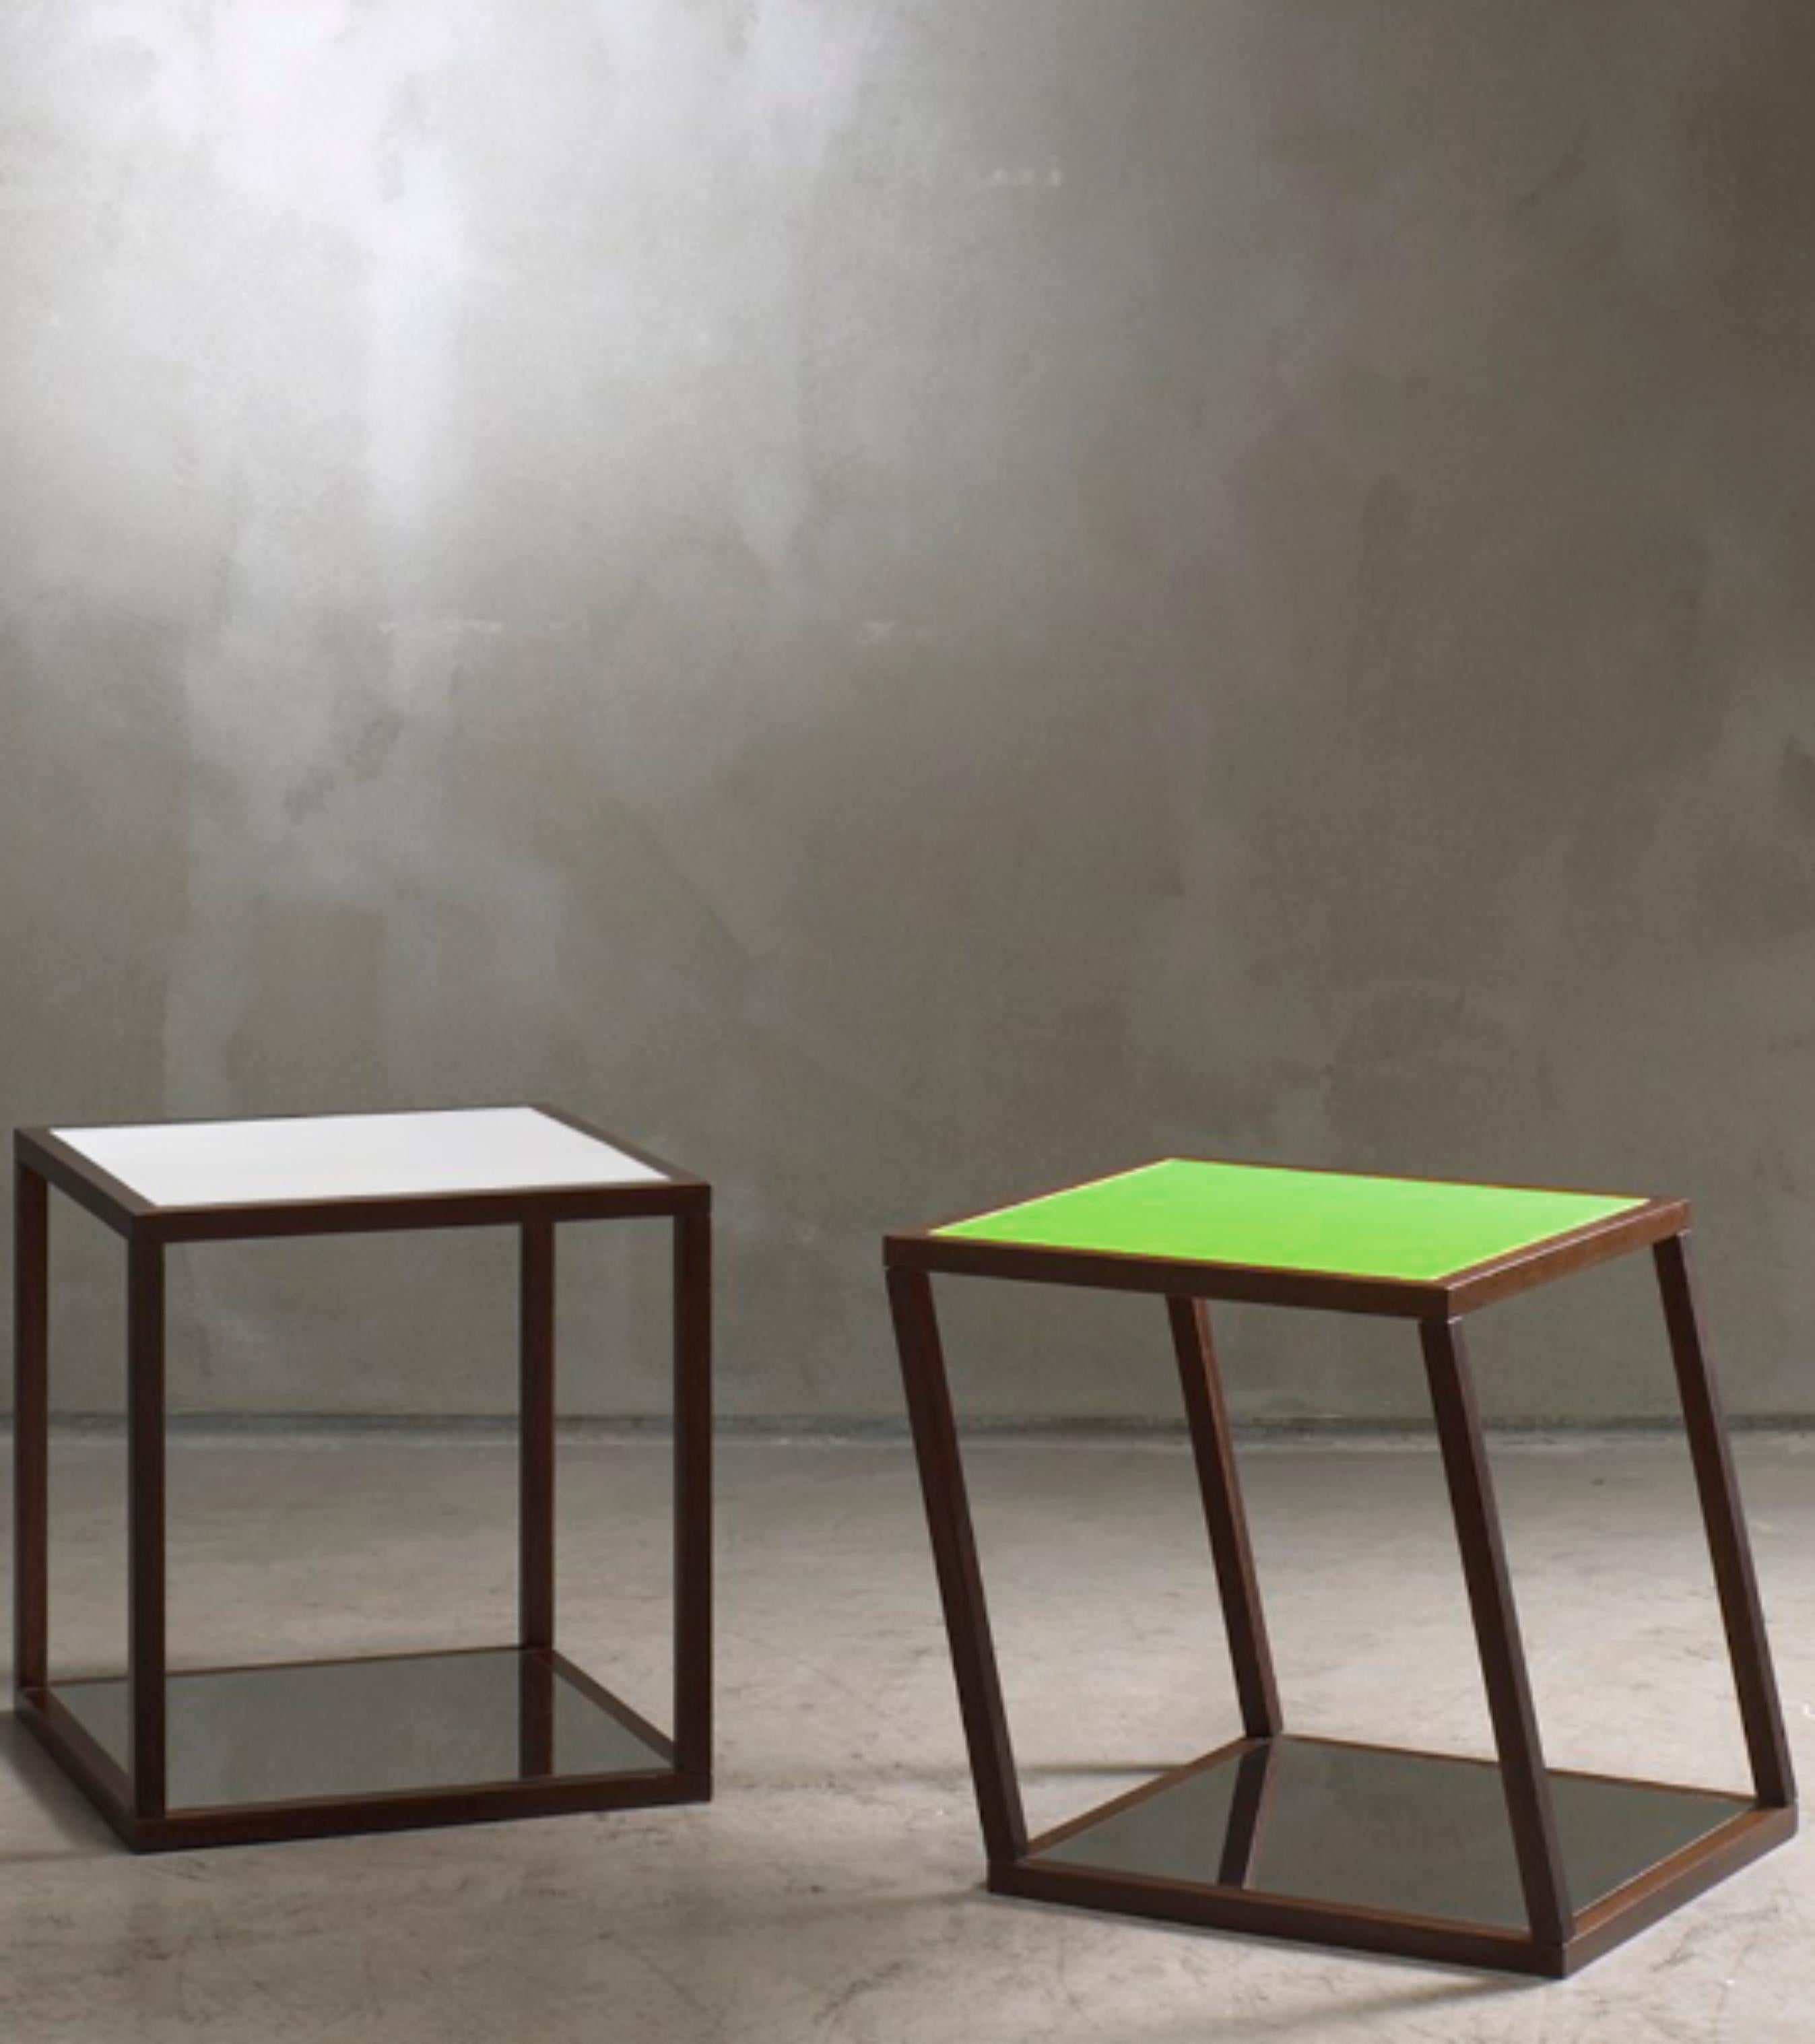 CF LT07.5 low table by Caturegli Formica.
Dimensions: W 38 x D 38 H 40 cm
Materials: Wood, Plastic

The top of low tables changes its colour according to the point of view.
S-Steel structure available

Biographical notes

Beppe Caturegli